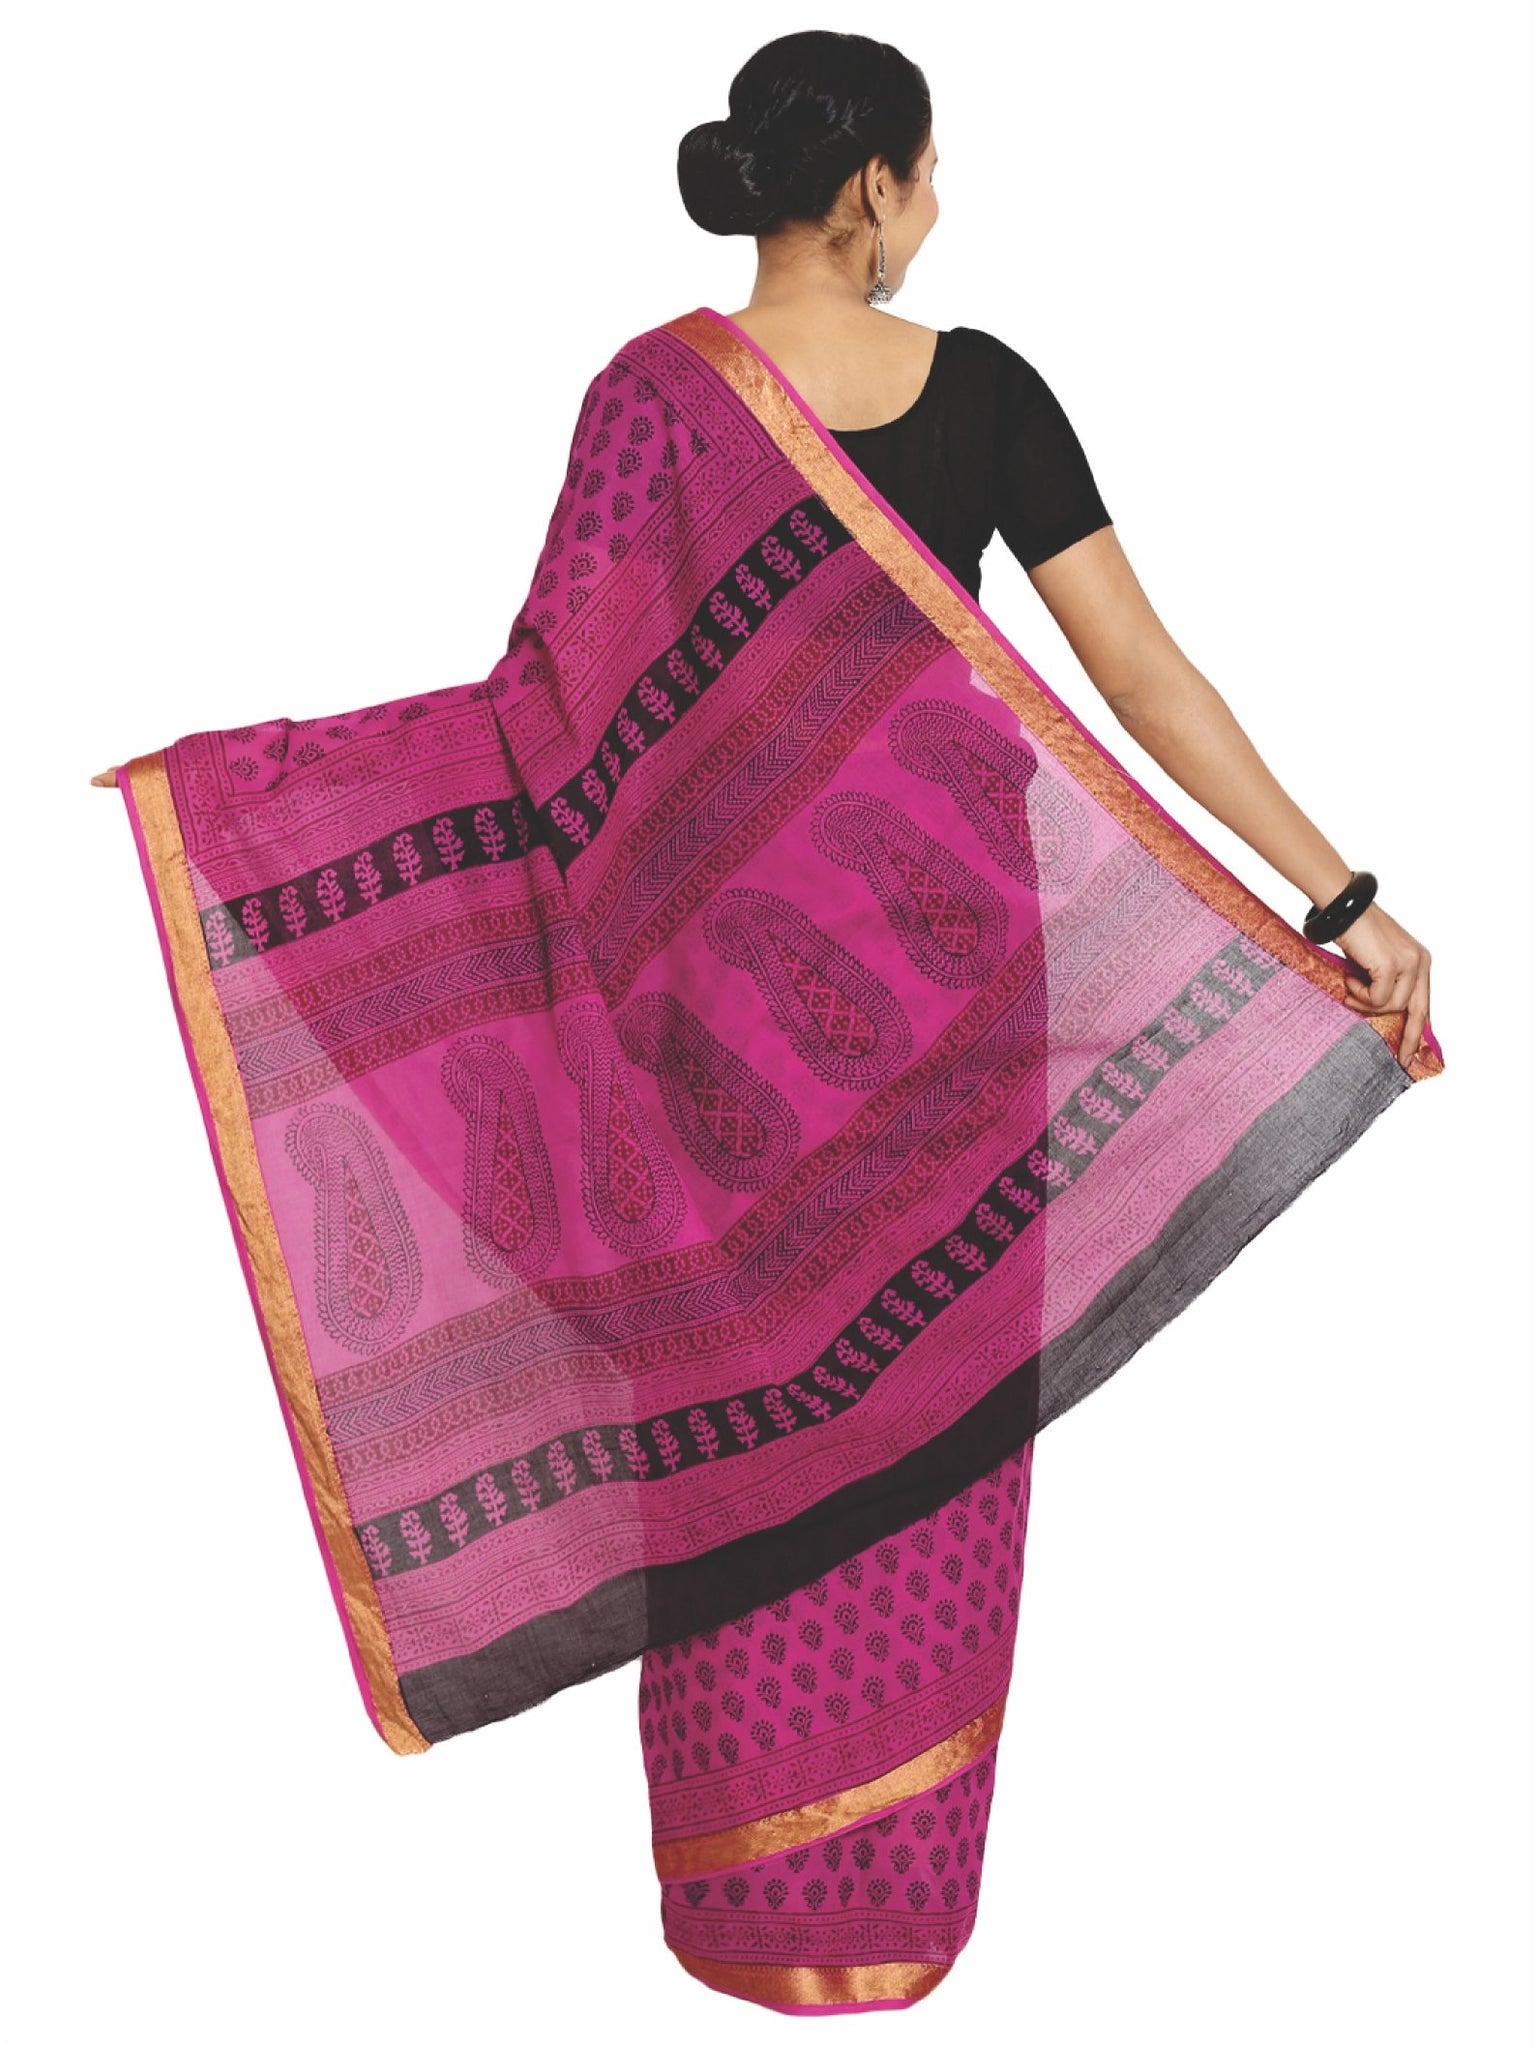 Magenta Cotton Hand Block Bagh Print Handcrafted Saree-Saree-Kalakari India-ZIBASA0047-Bagh, Cotton, Geographical Indication, Hand Blocks, Hand Crafted, Heritage Prints, Natural Dyes, Sarees, Sustainable Fabrics-[Linen,Ethnic,wear,Fashionista,Handloom,Handicraft,Indigo,blockprint,block,print,Cotton,Chanderi,Blue, latest,classy,party,bollywood,trendy,summer,style,traditional,formal,elegant,unique,style,hand,block,print, dabu,booti,gift,present,glamorous,affordable,collectible,Sari,Saree,printed, 